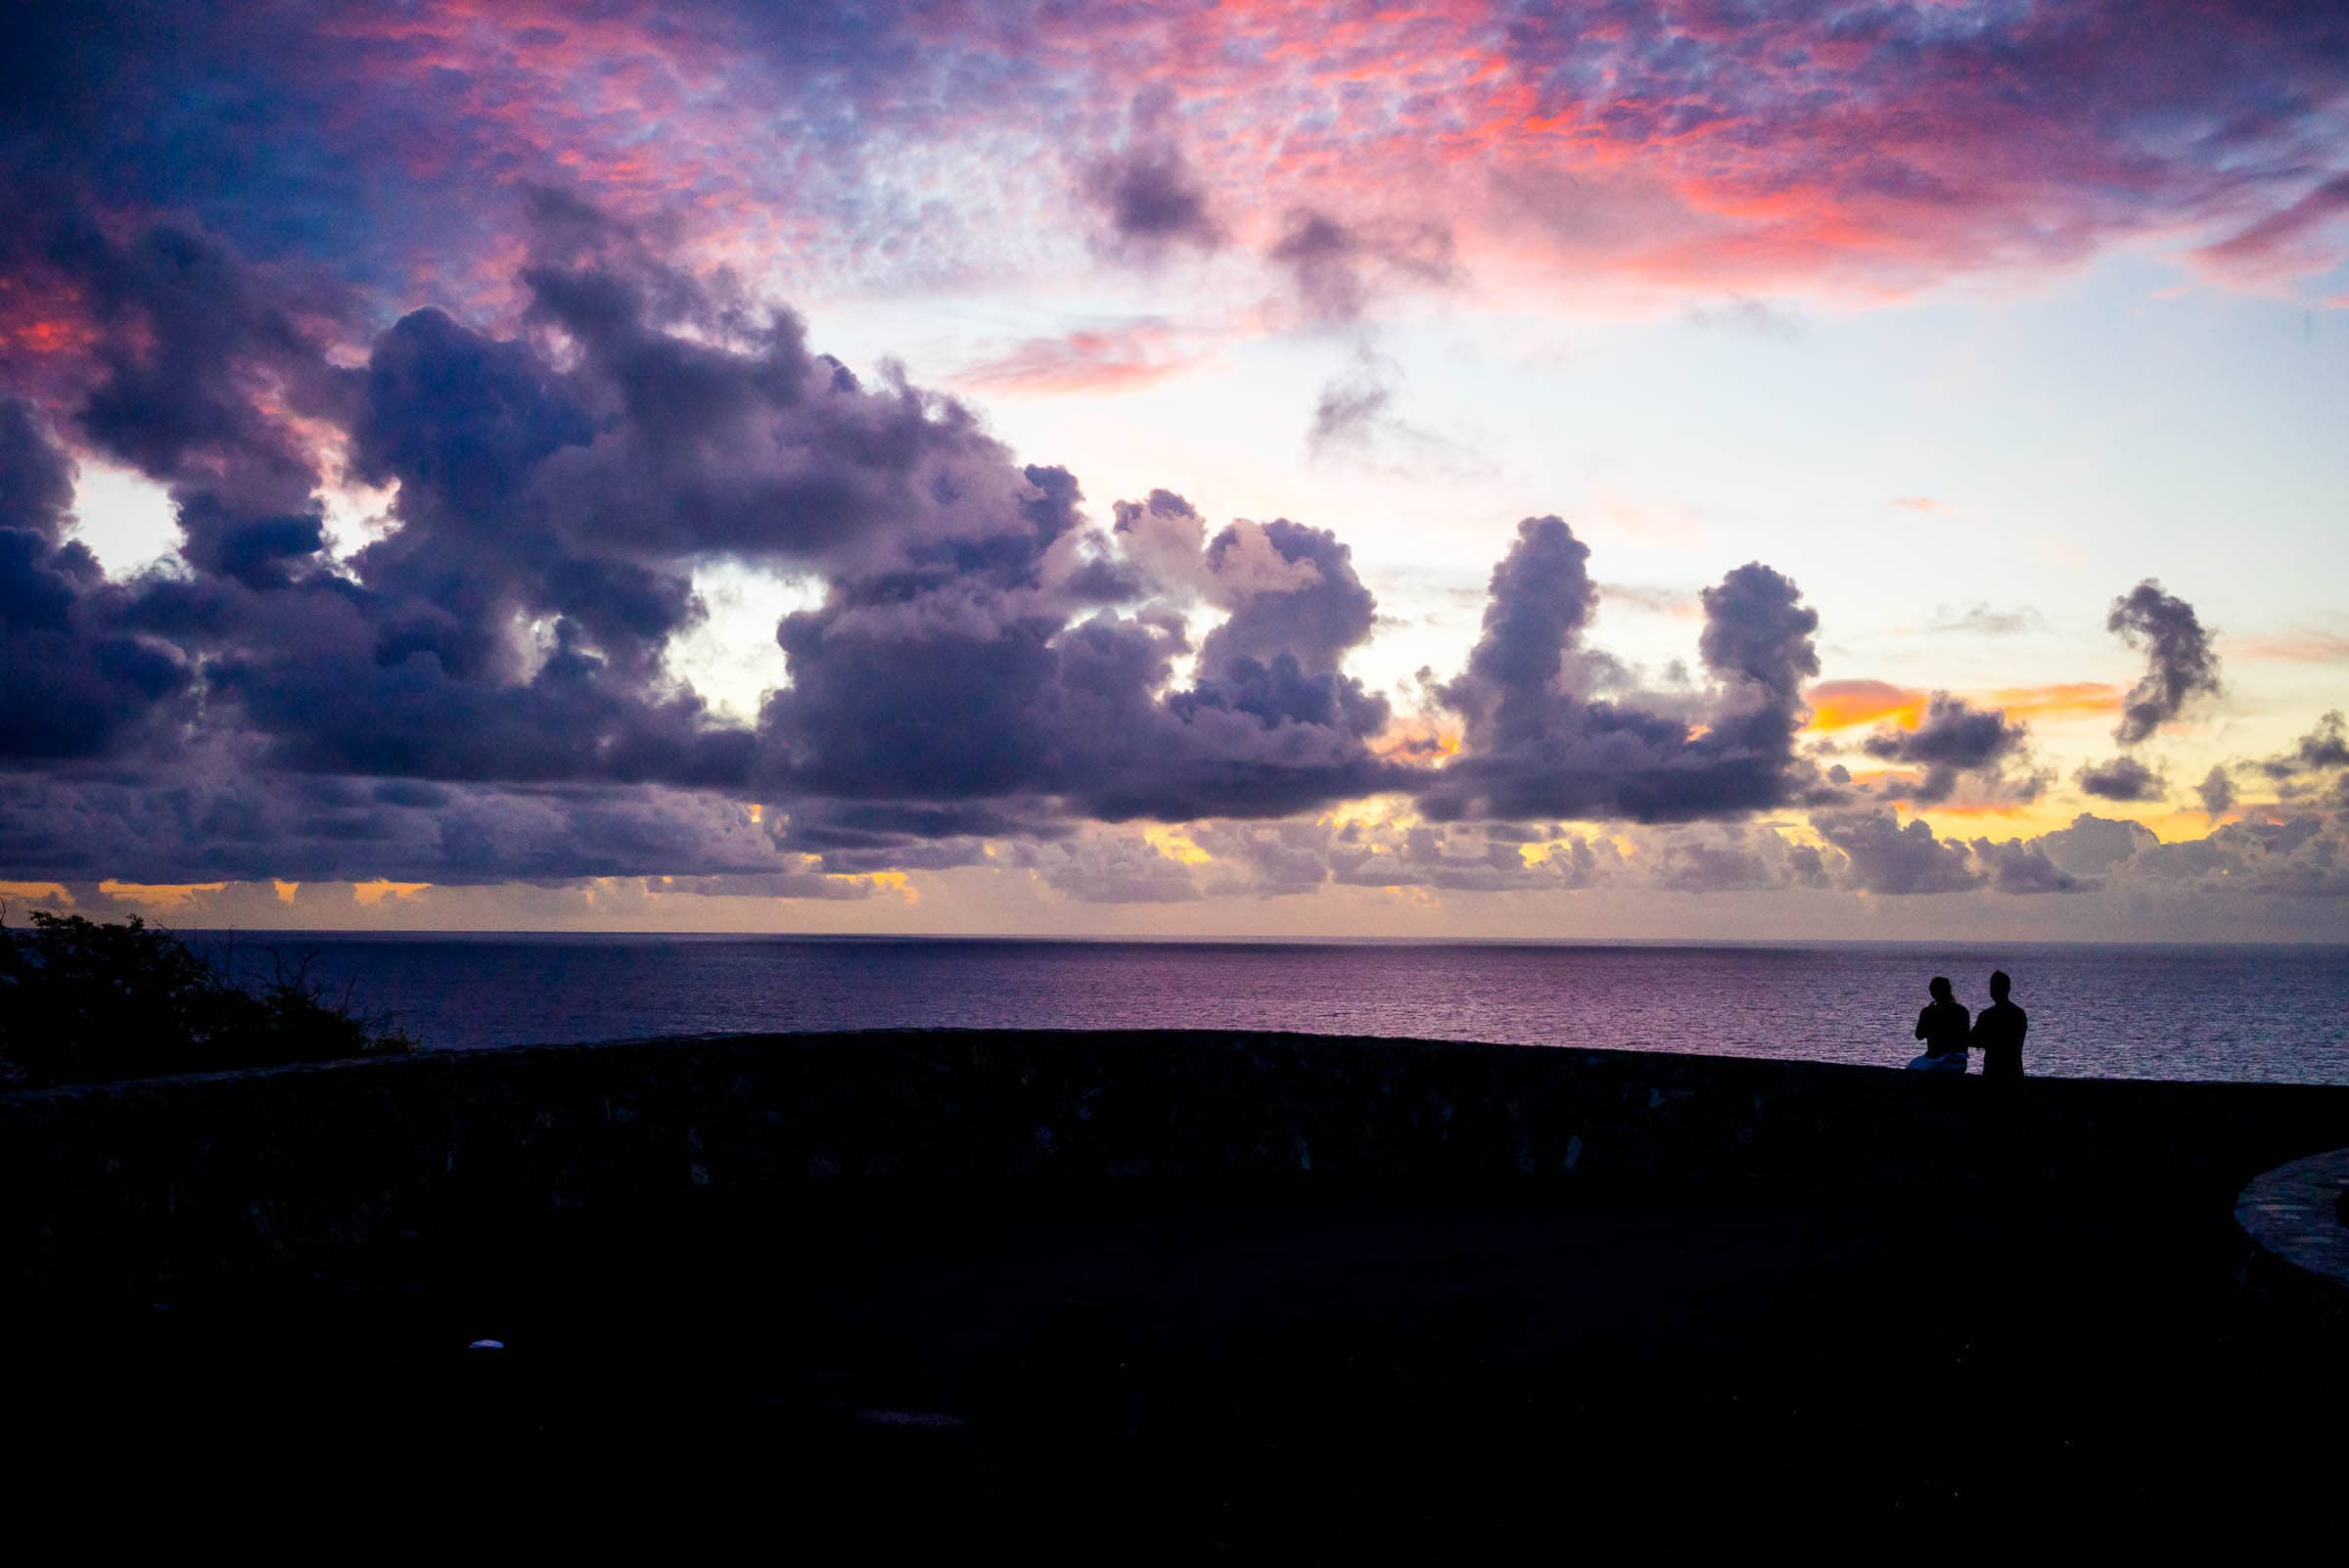 Sunrise at Point Udall, St. Croix by Patrick Bennett